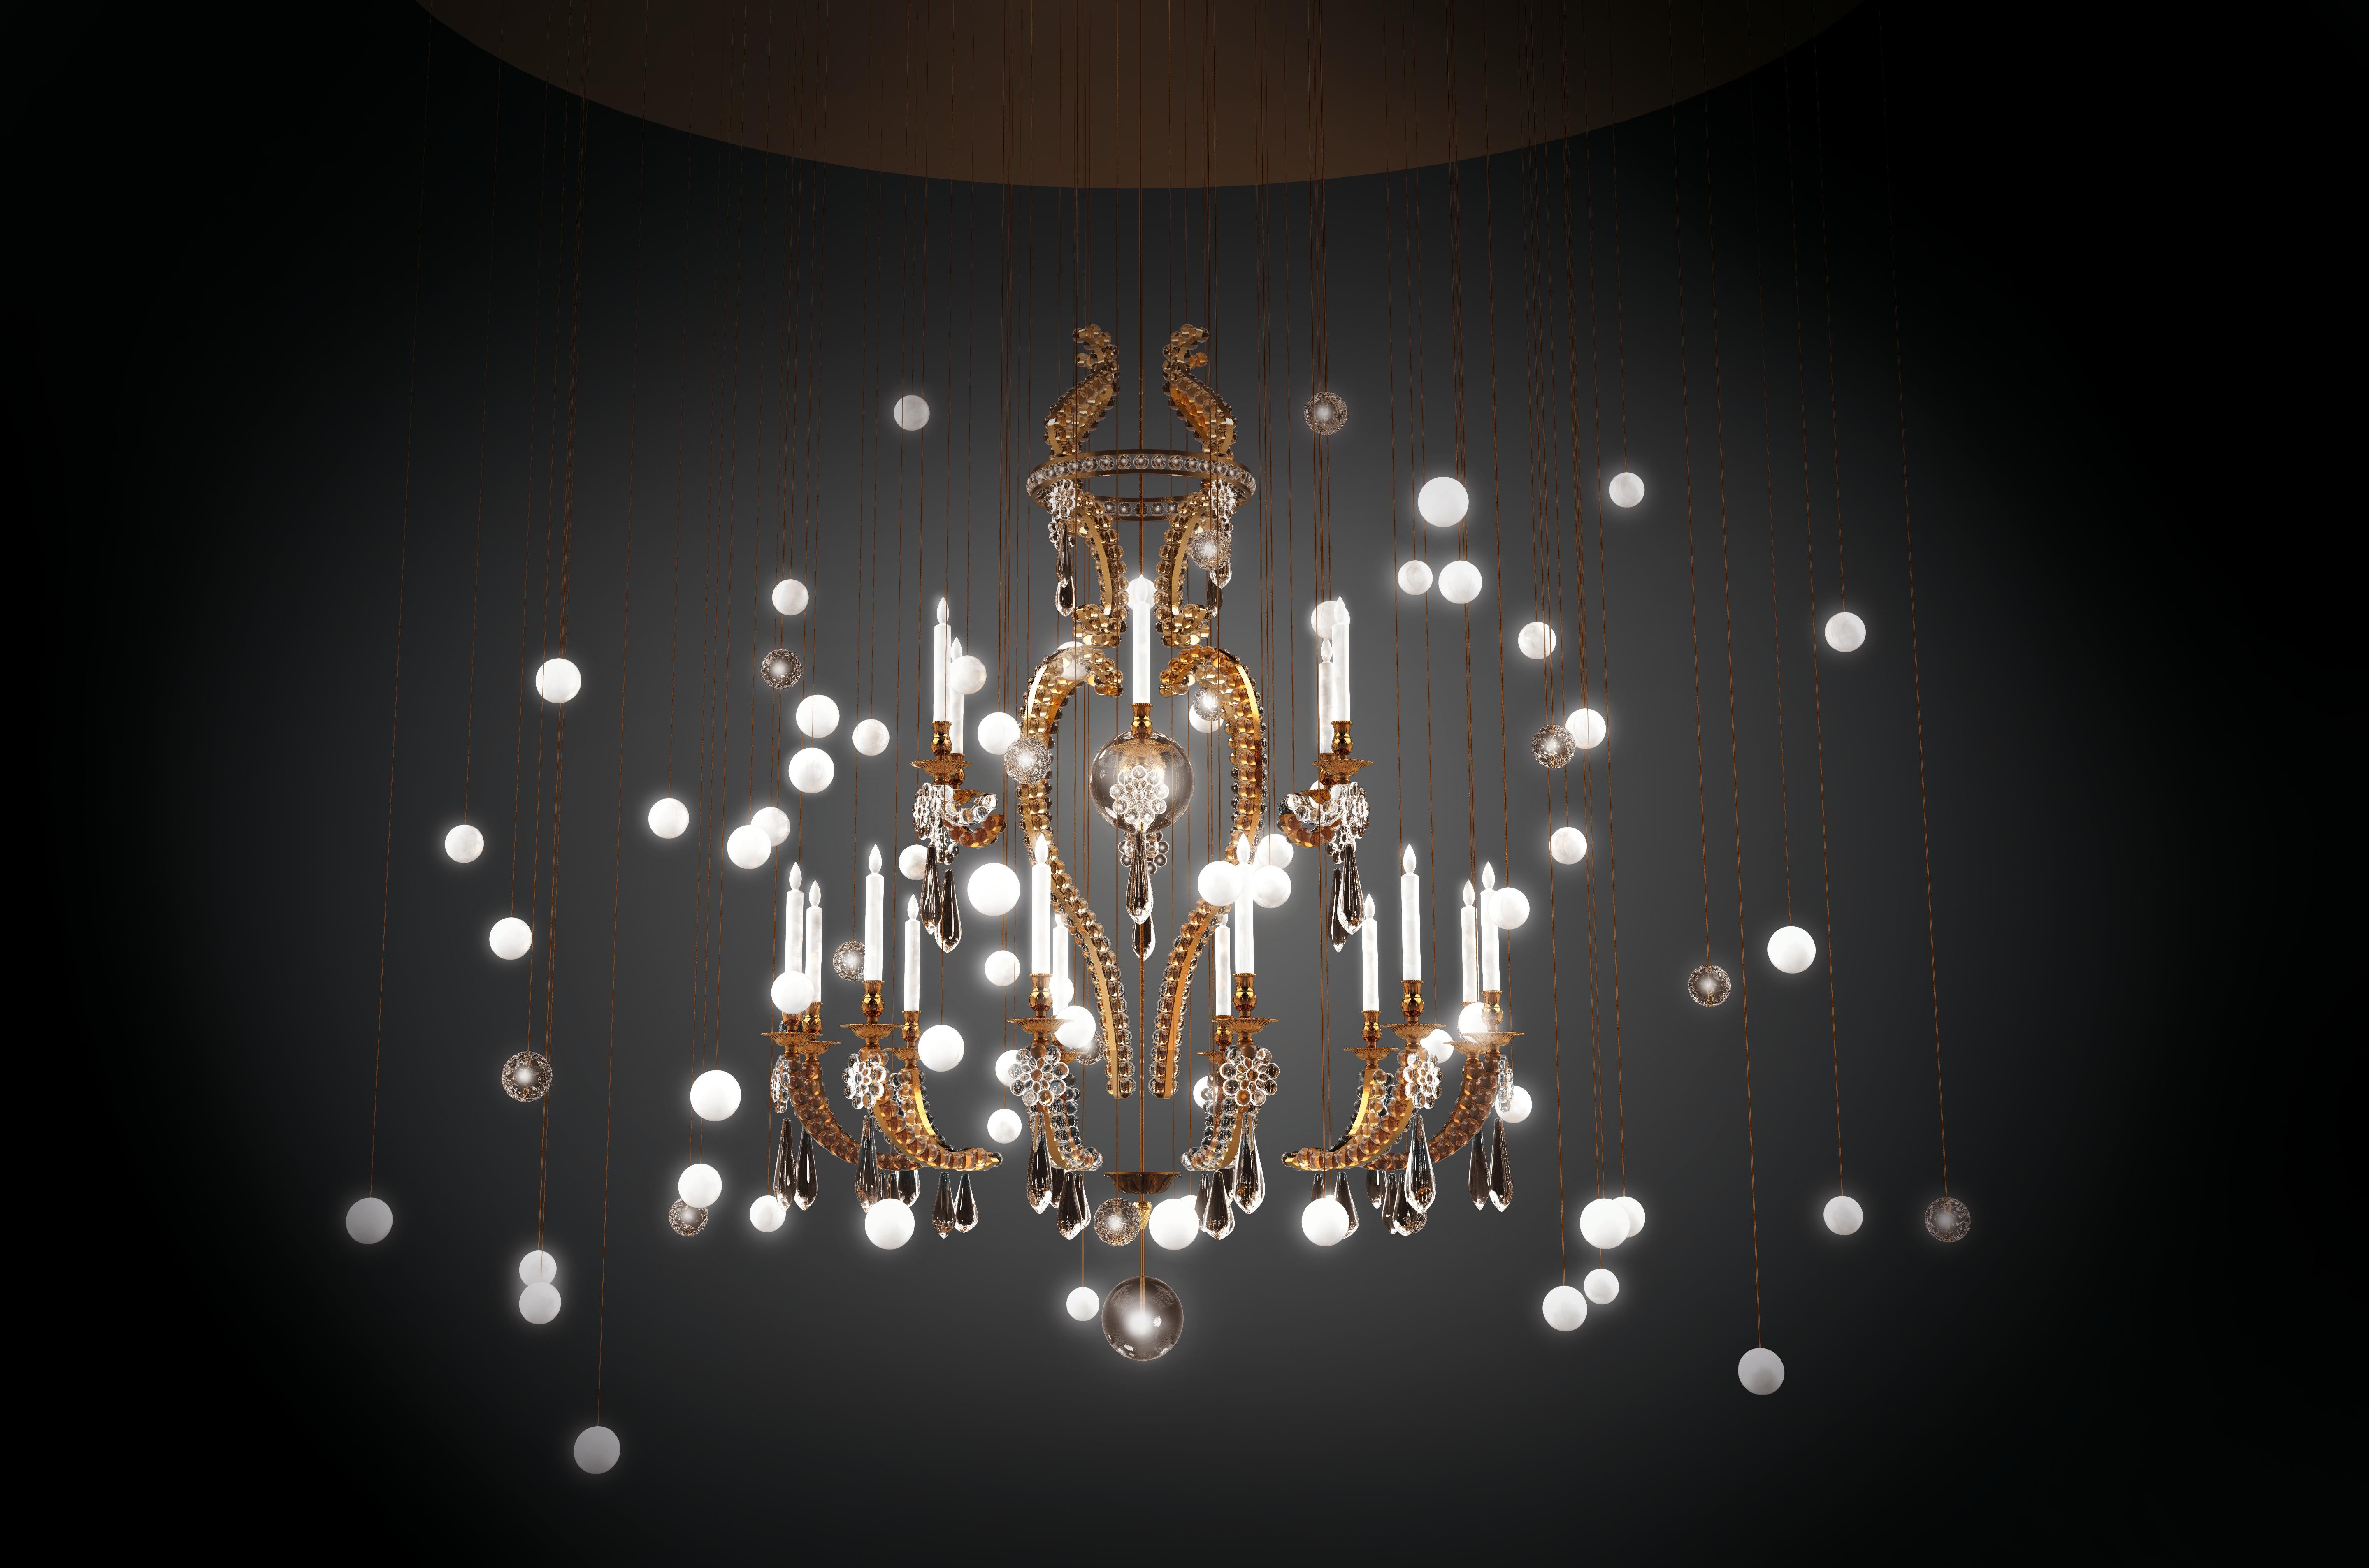 The Bespoke chandelier Le Merveilleux – Le Black is designed by Sylvie Maréchal and by Jean Delisle and it is entirely manufactured in France. This chandelier is made in bronze and has 17 spheres in mouth blown glass, 64 spheres in handmade Limoges